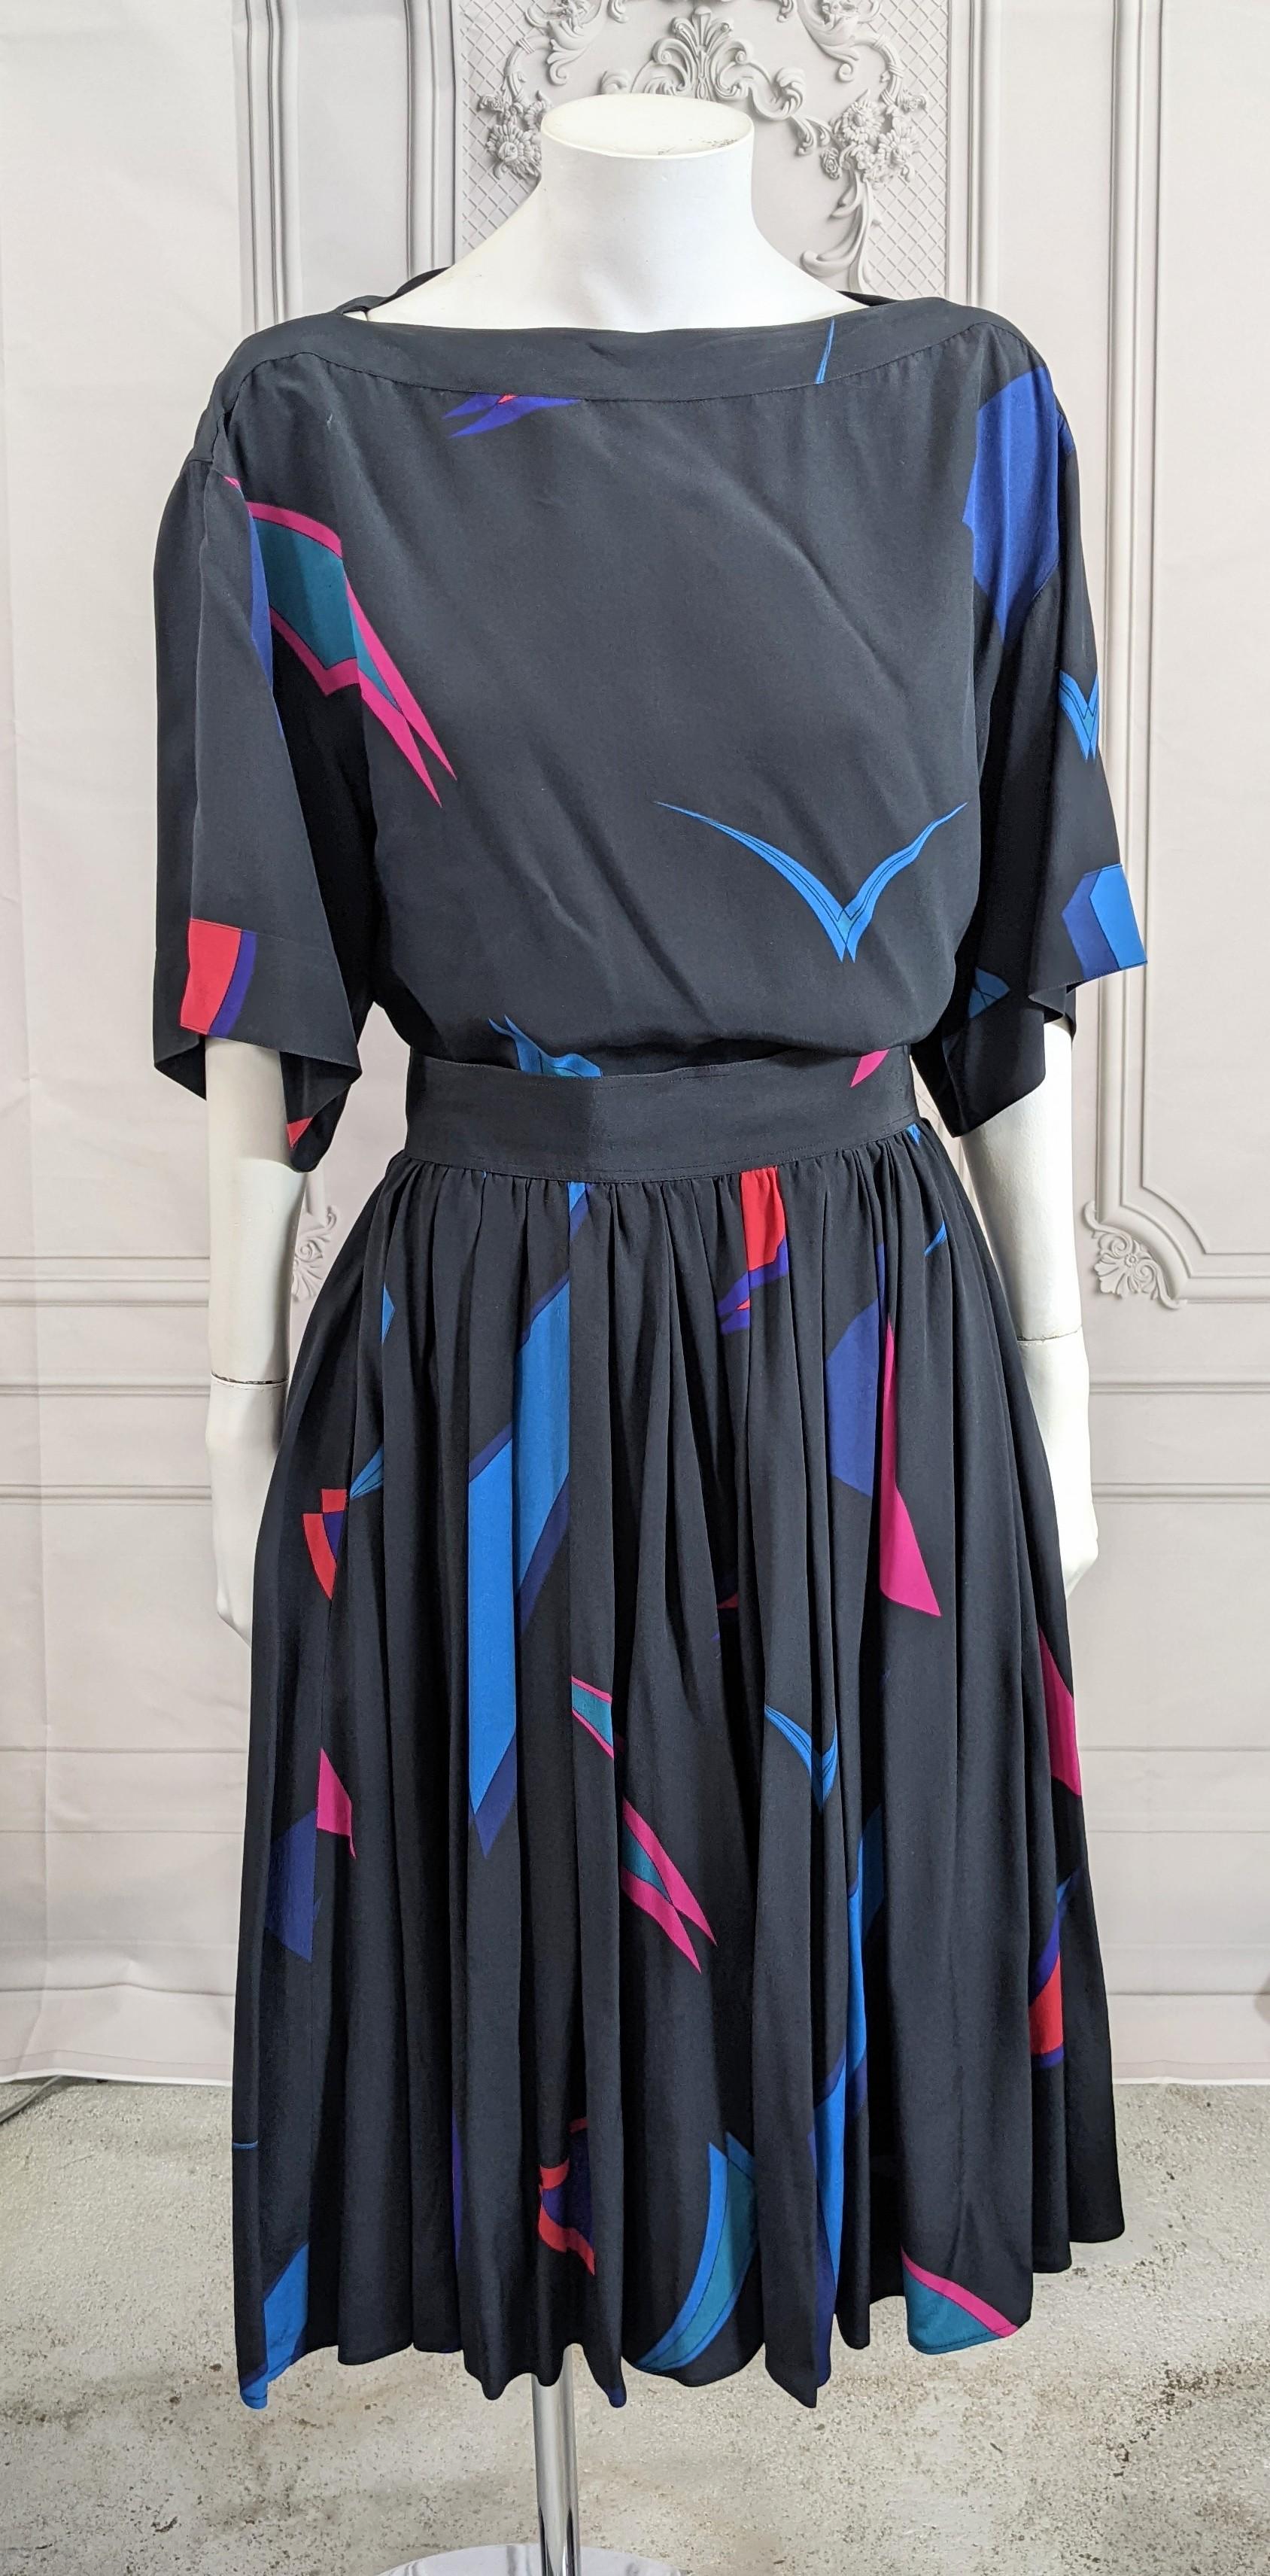 Lovely Chloe by Lagerfeld Silk Crepe Culotte Set from the late 1970's. Printed Bateau neck full T shirt with full gathered skirt which are actually shorts. Wonderful Deco inspired print on navy silk crepe de chine. Back zip and hook entry.
Work very